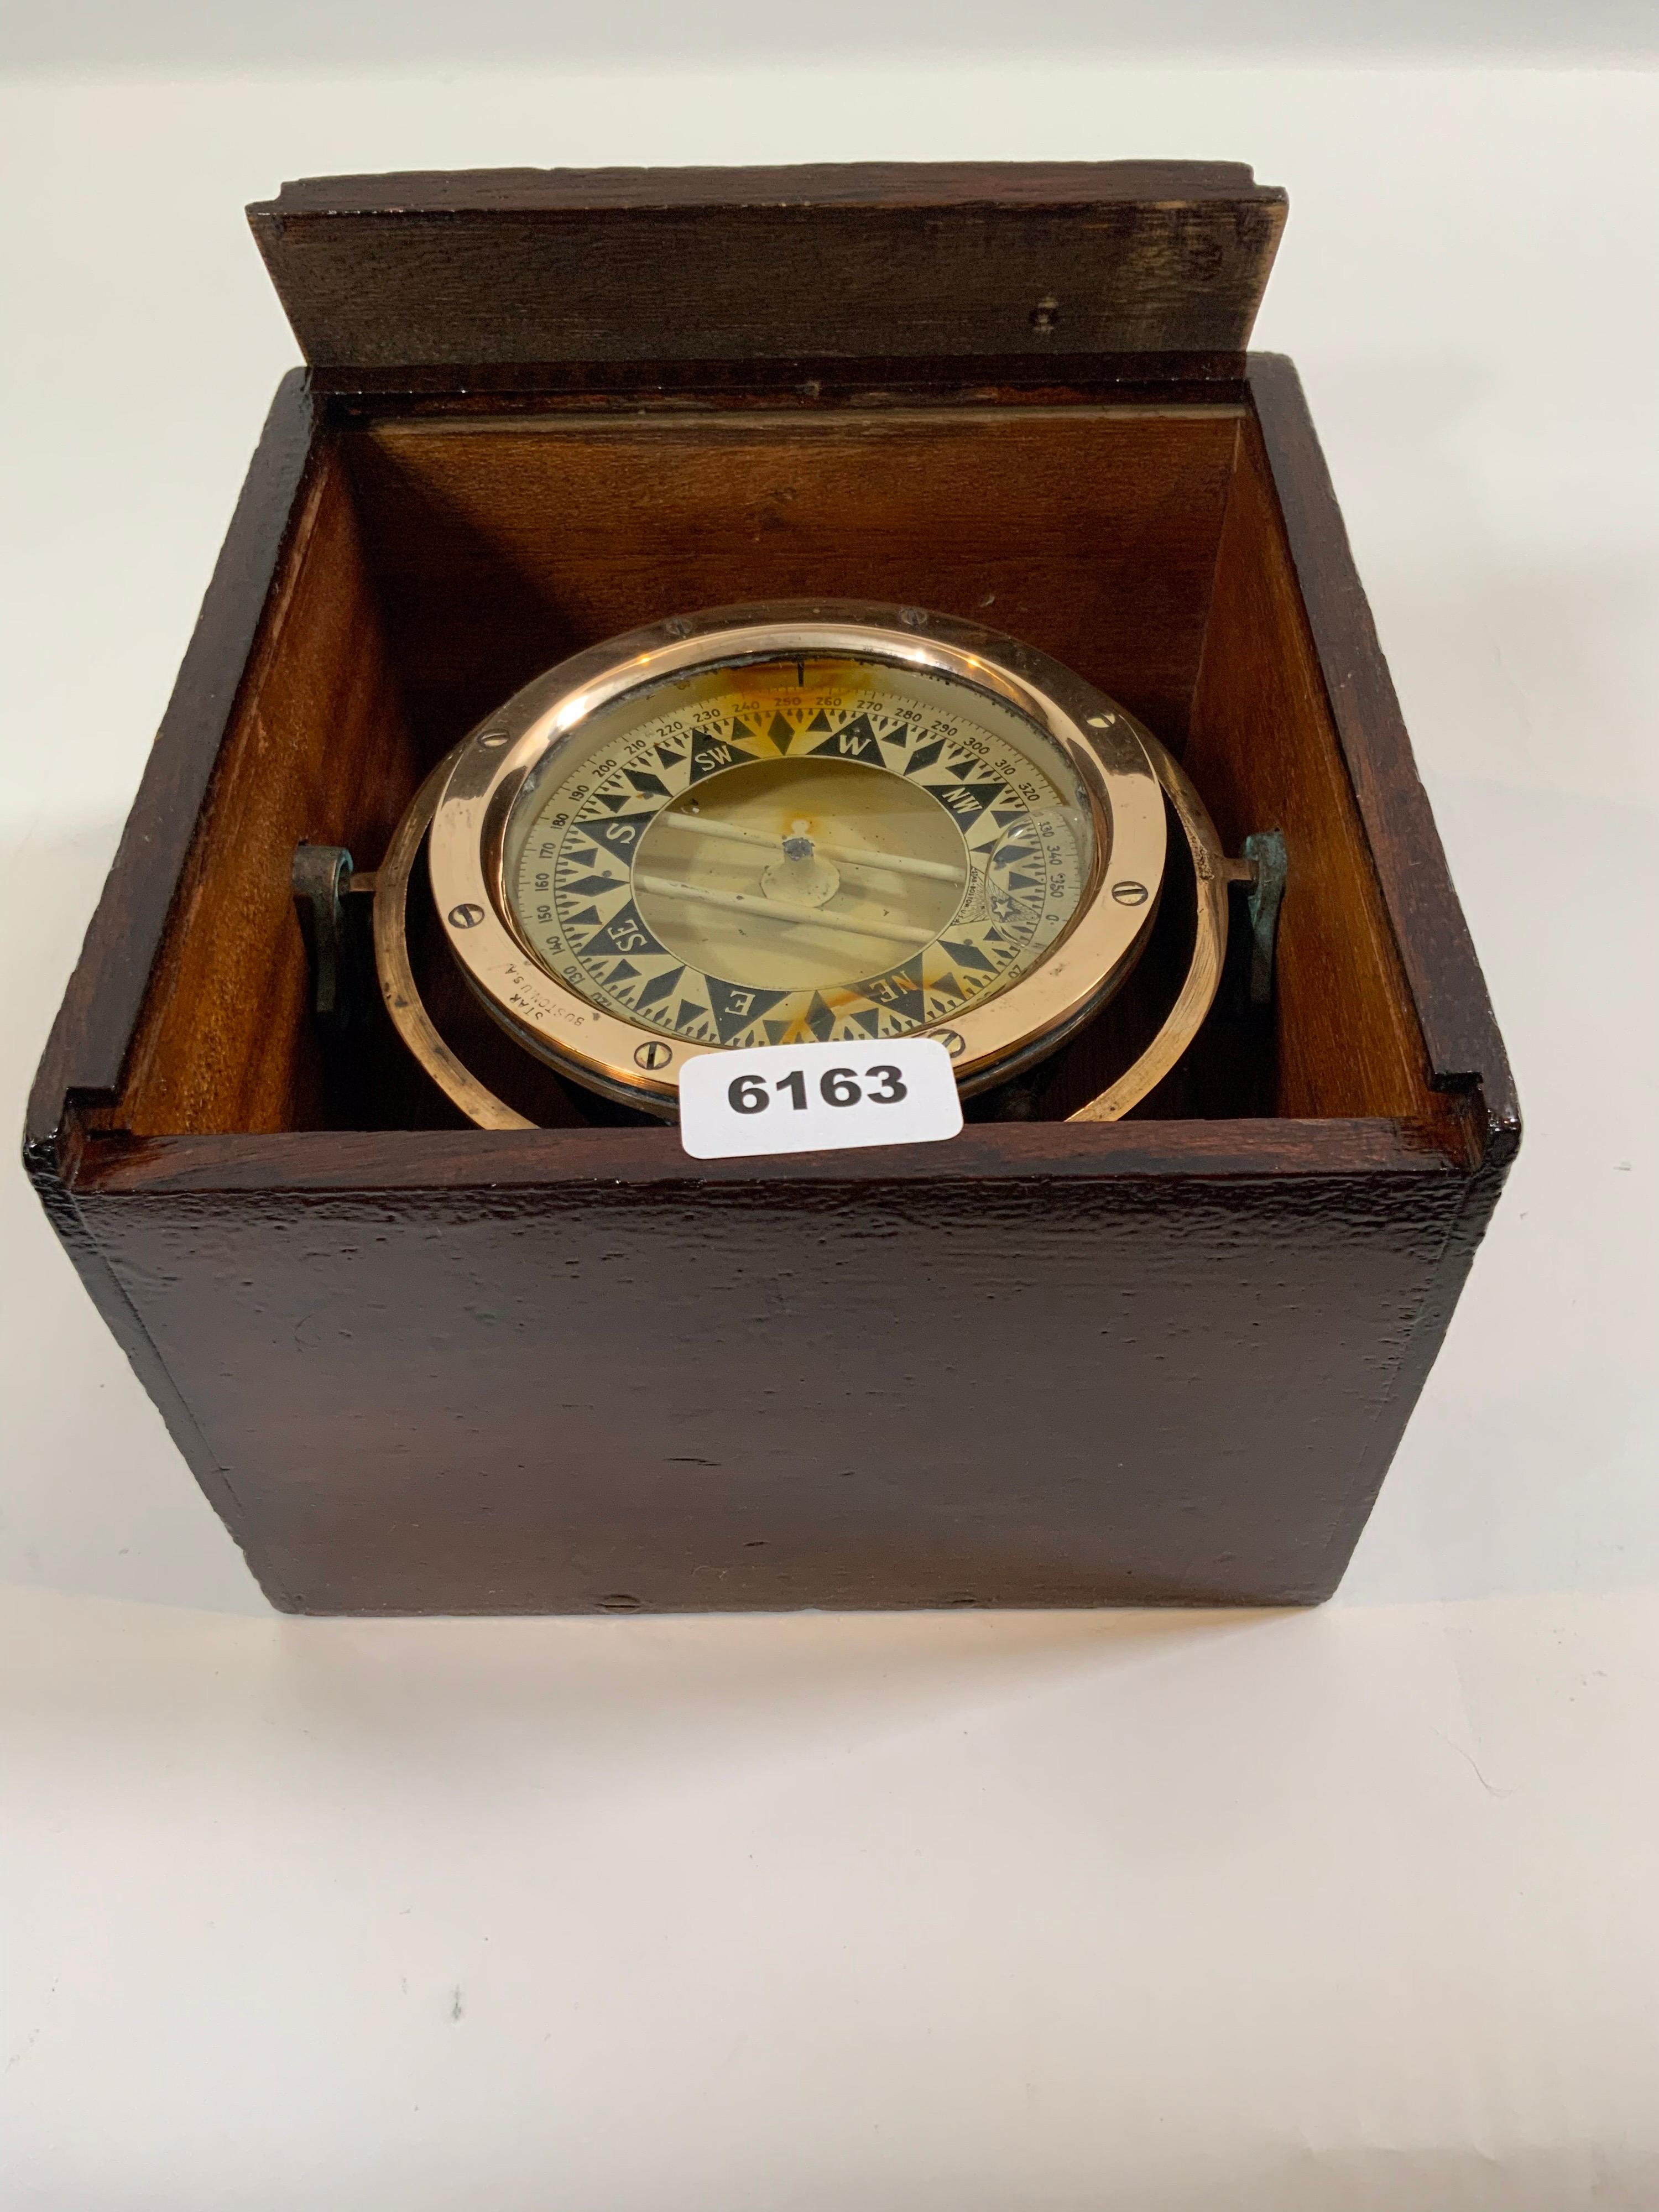 Gimballed brass boat compass fitted to a varnished wood box with sliding lid. Compass card is marked with maker's name 